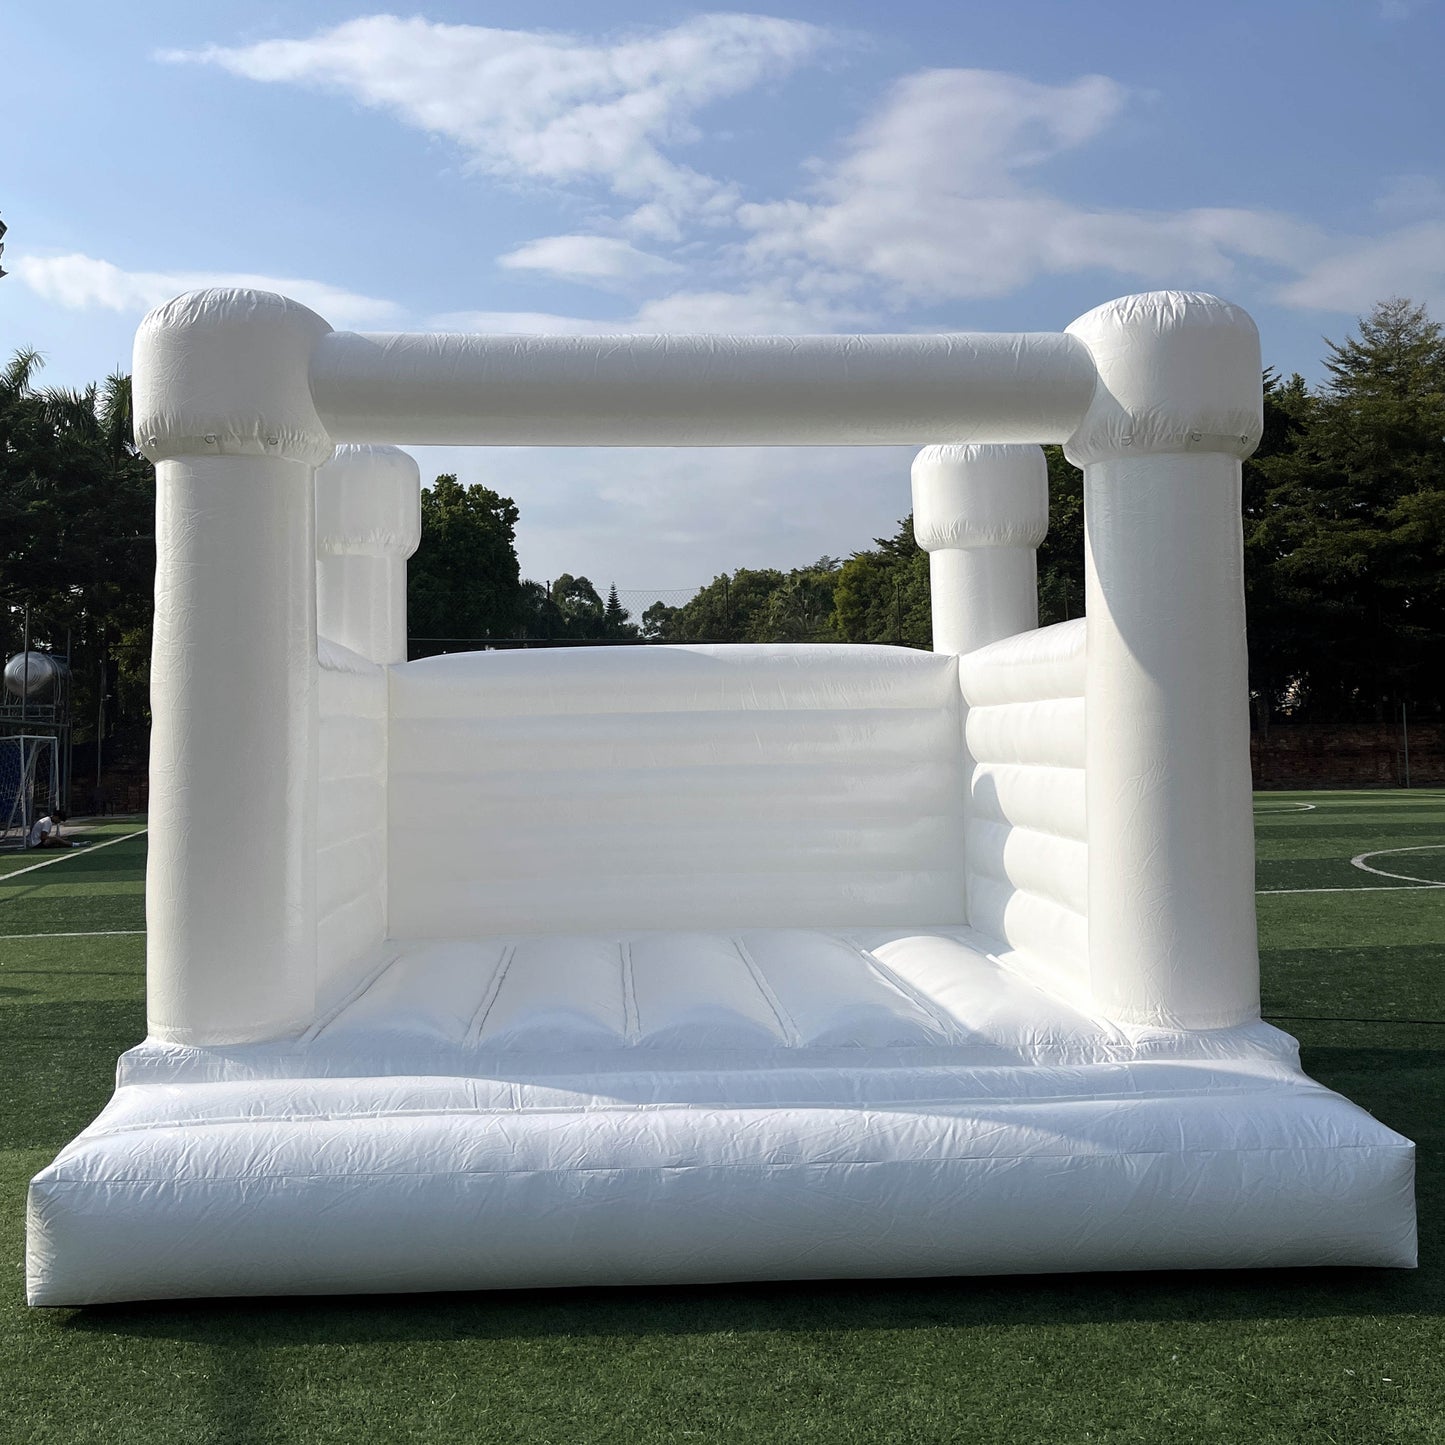 Flat Top White Bounce House Inflatable For Kids